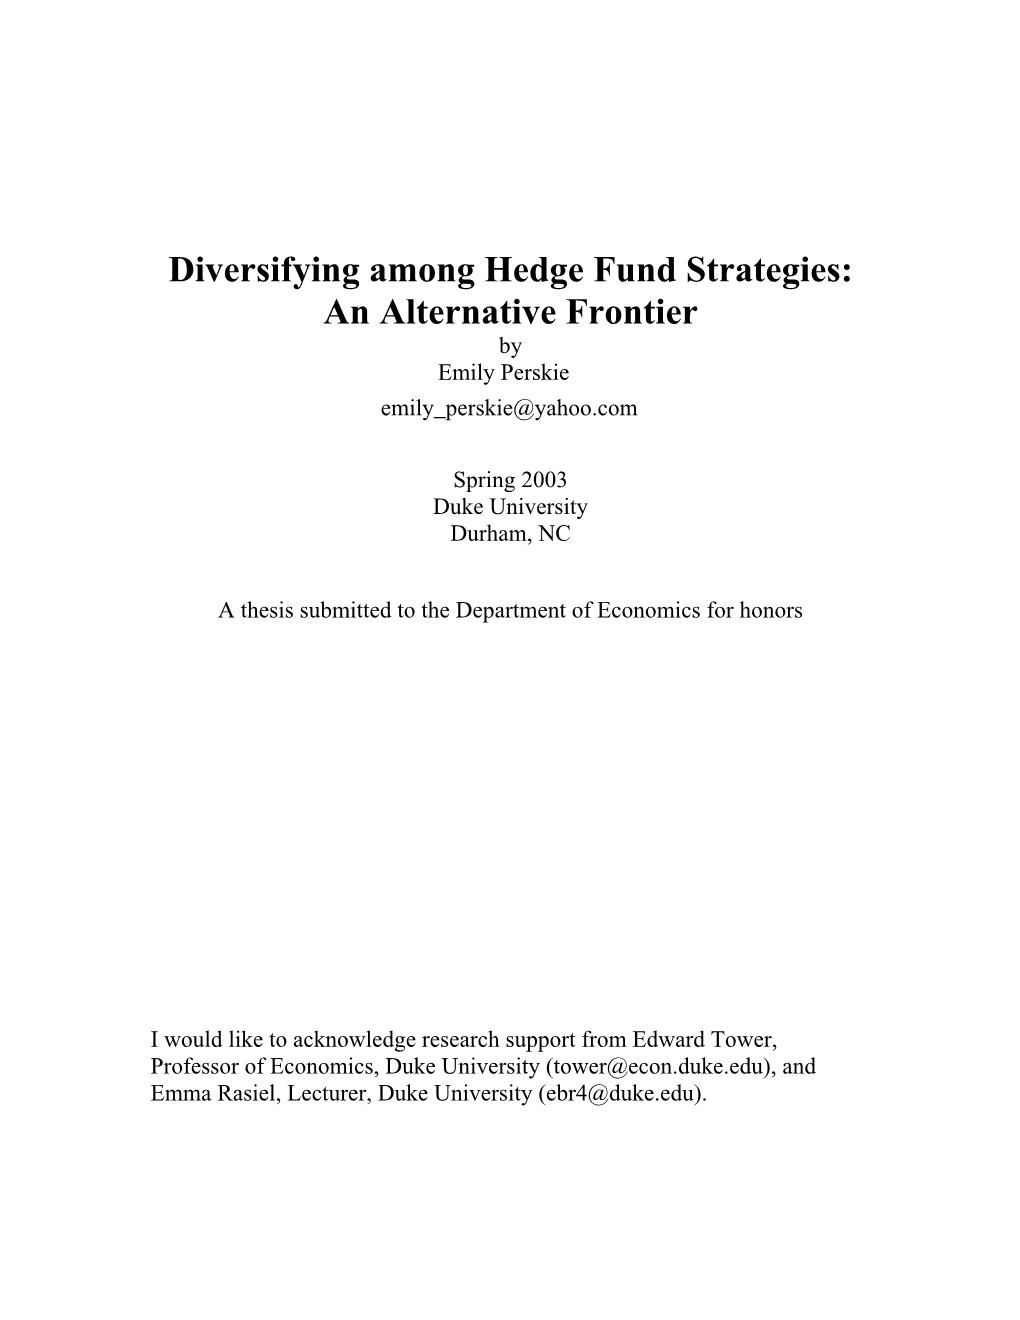 Diversifying Among Hedge Fund Strategies: an Alternative Frontier by Emily Perskie Emily Perskie@Yahoo.Com